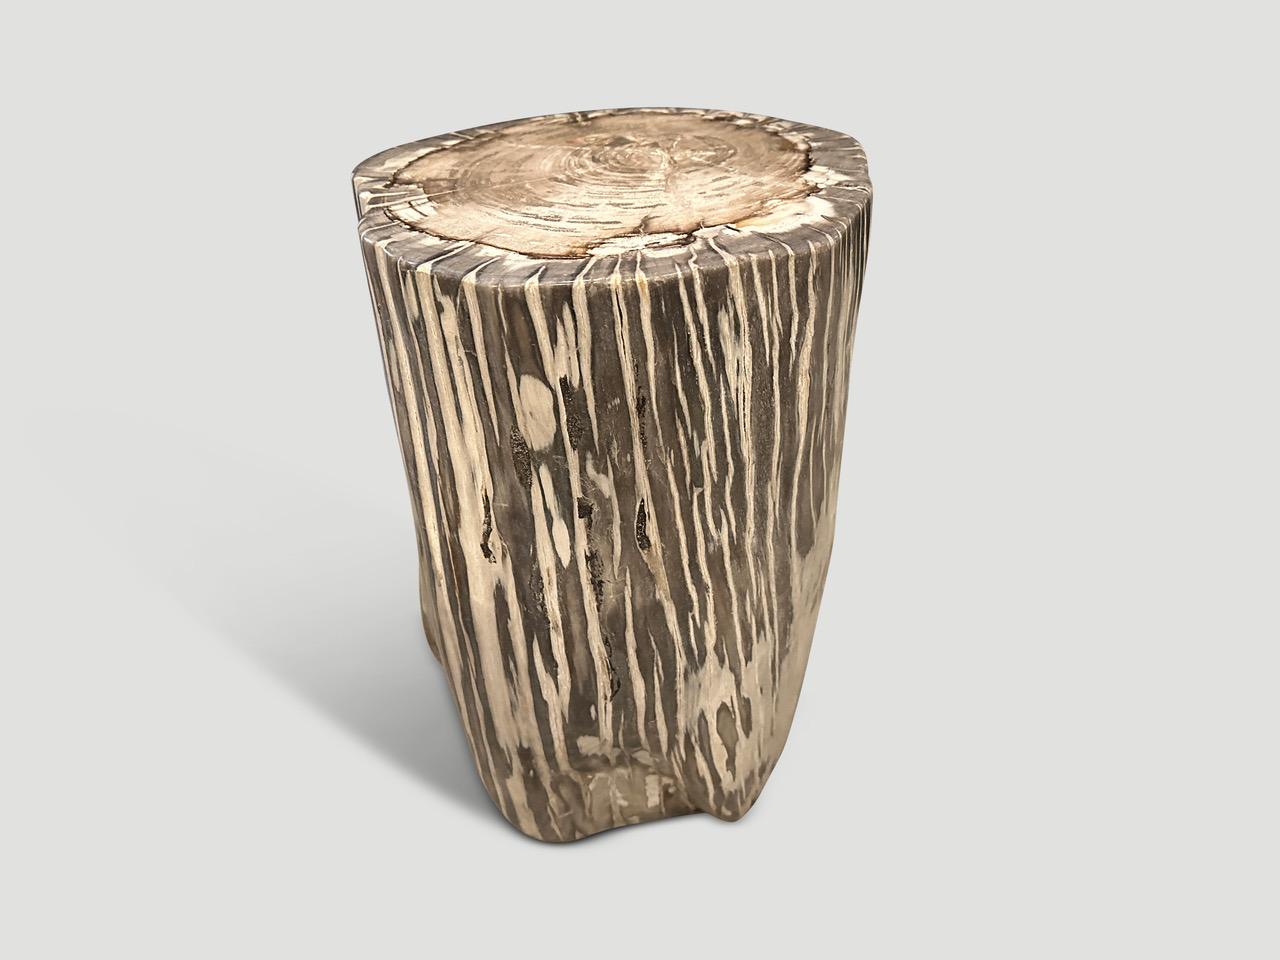 Impressive high quality petrified wood side table. It’s fascinating how Mother Nature produces these stunning 40 million year old petrified teak logs with such contrasting colors and natural patterns throughout. Modern yet with so much history.

As